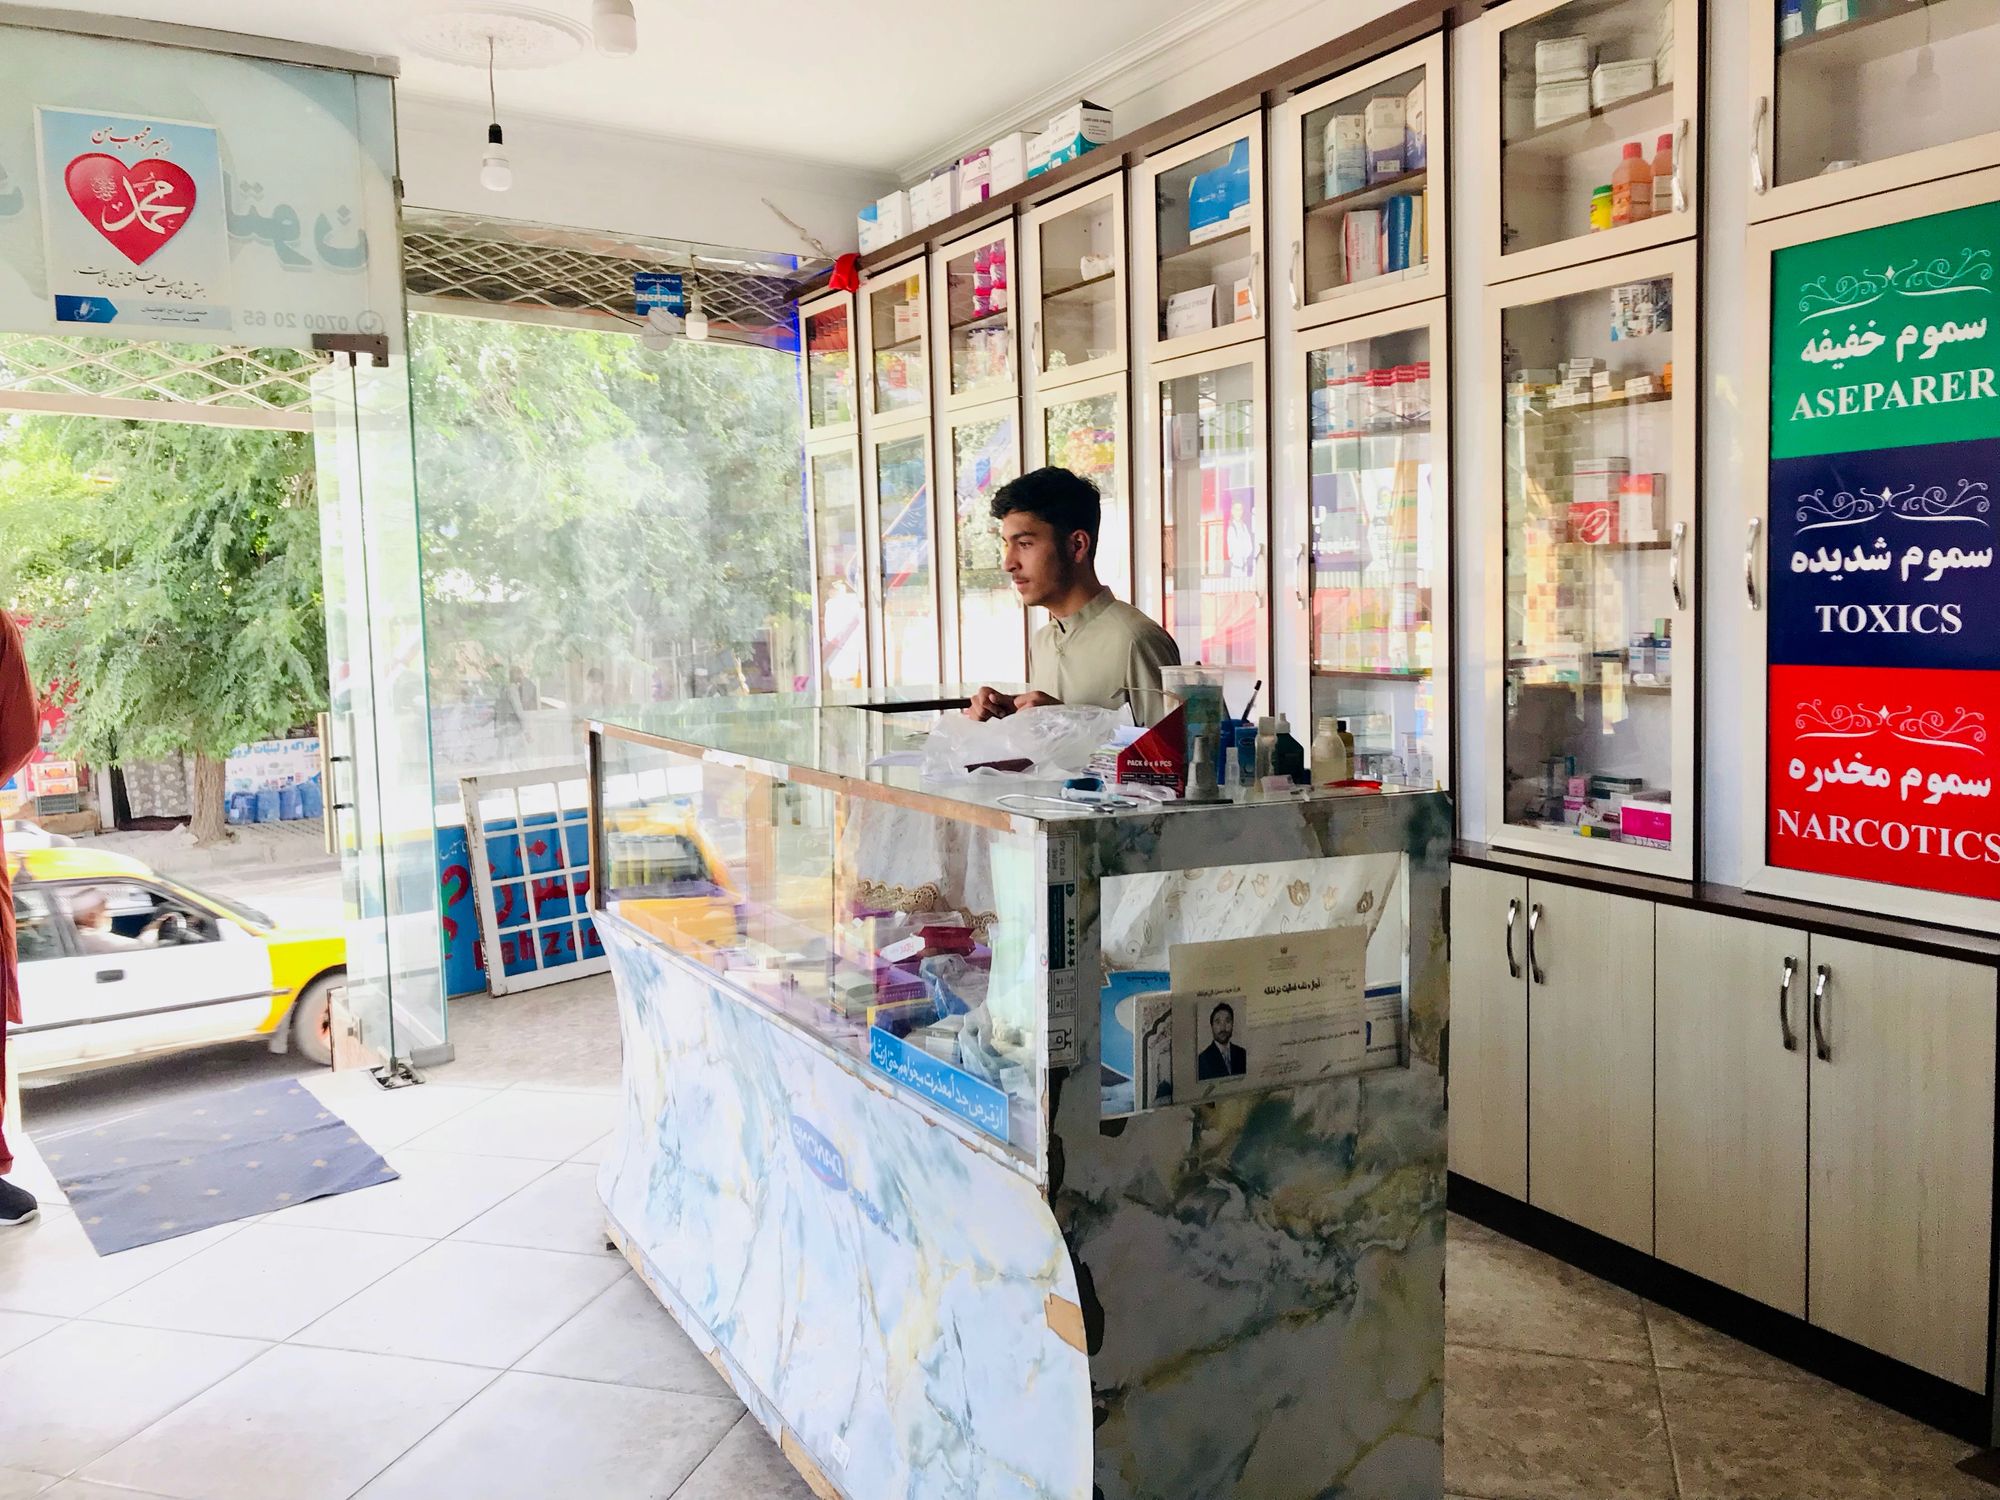 Affordability and Quality of Medication Questioned by Afghans